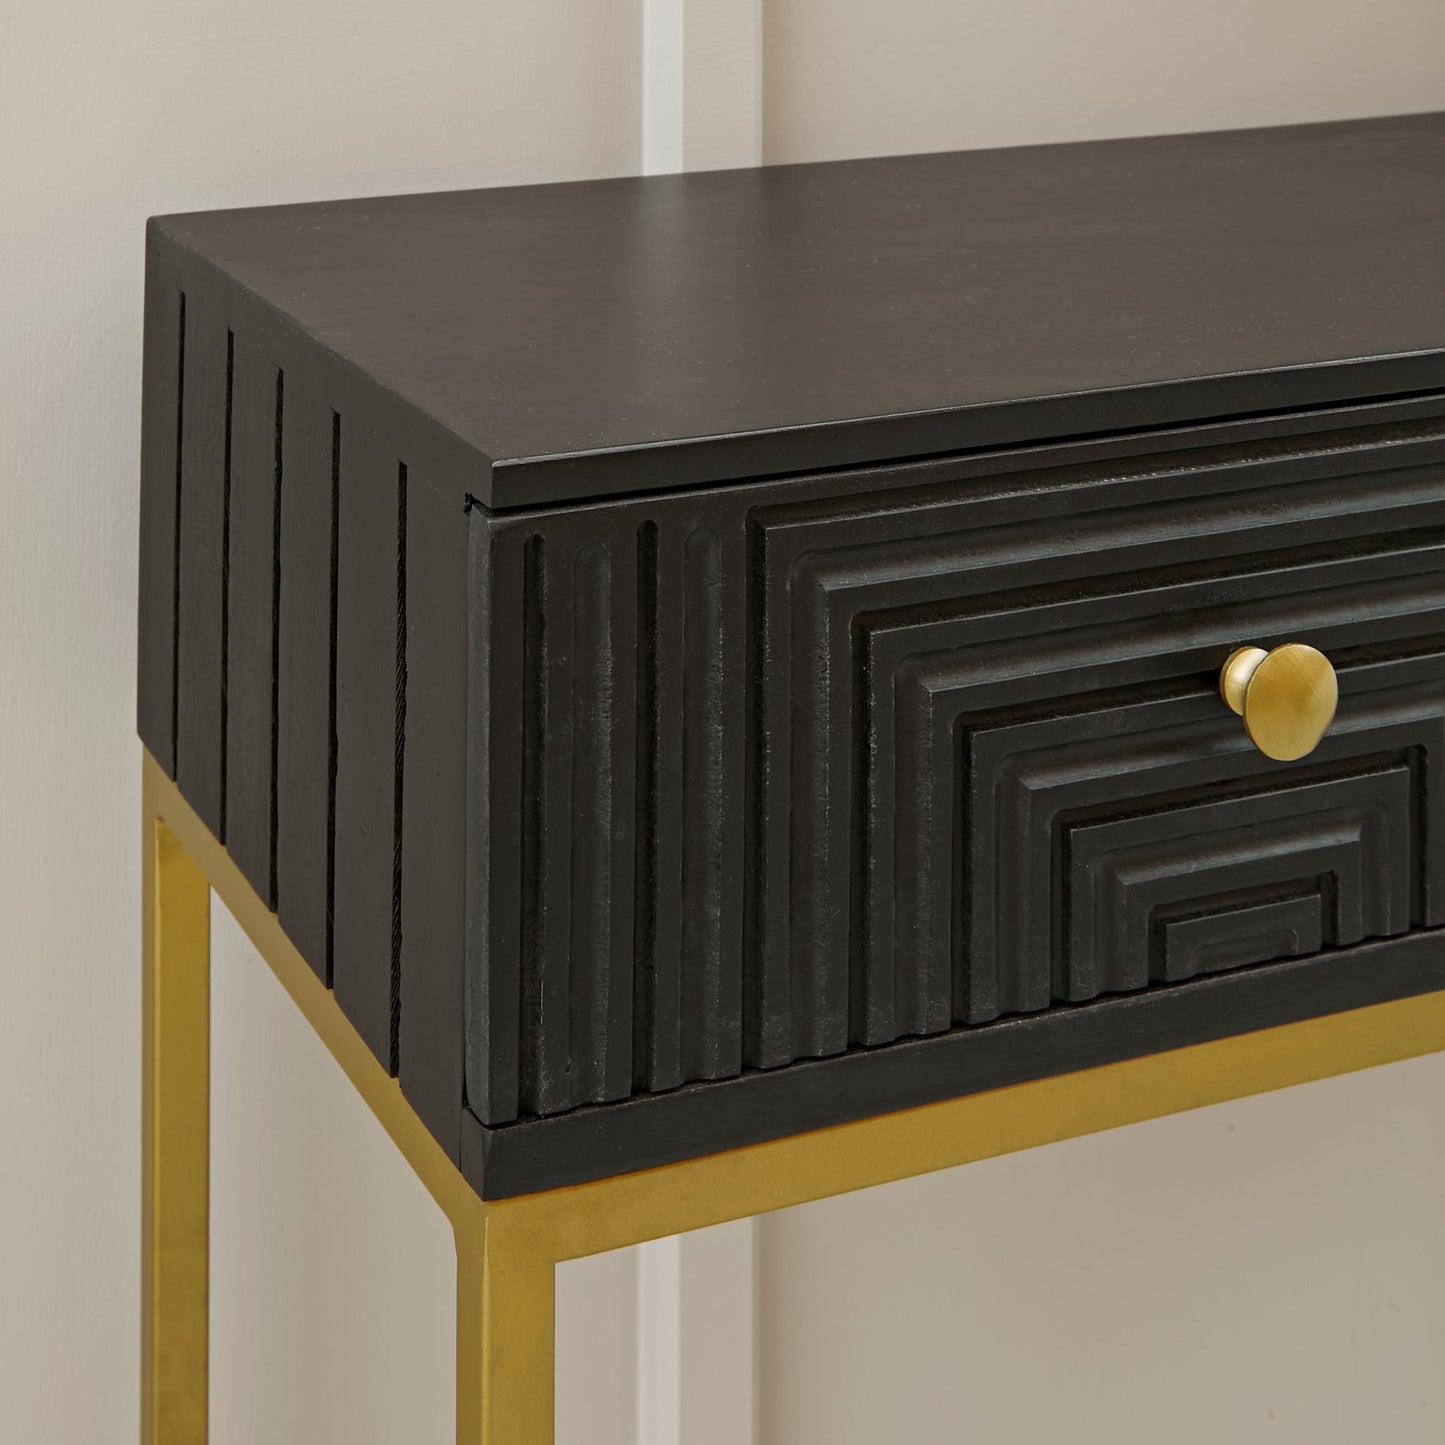 Rayna 2 Drawer Console Table - Jet Black - Laura James